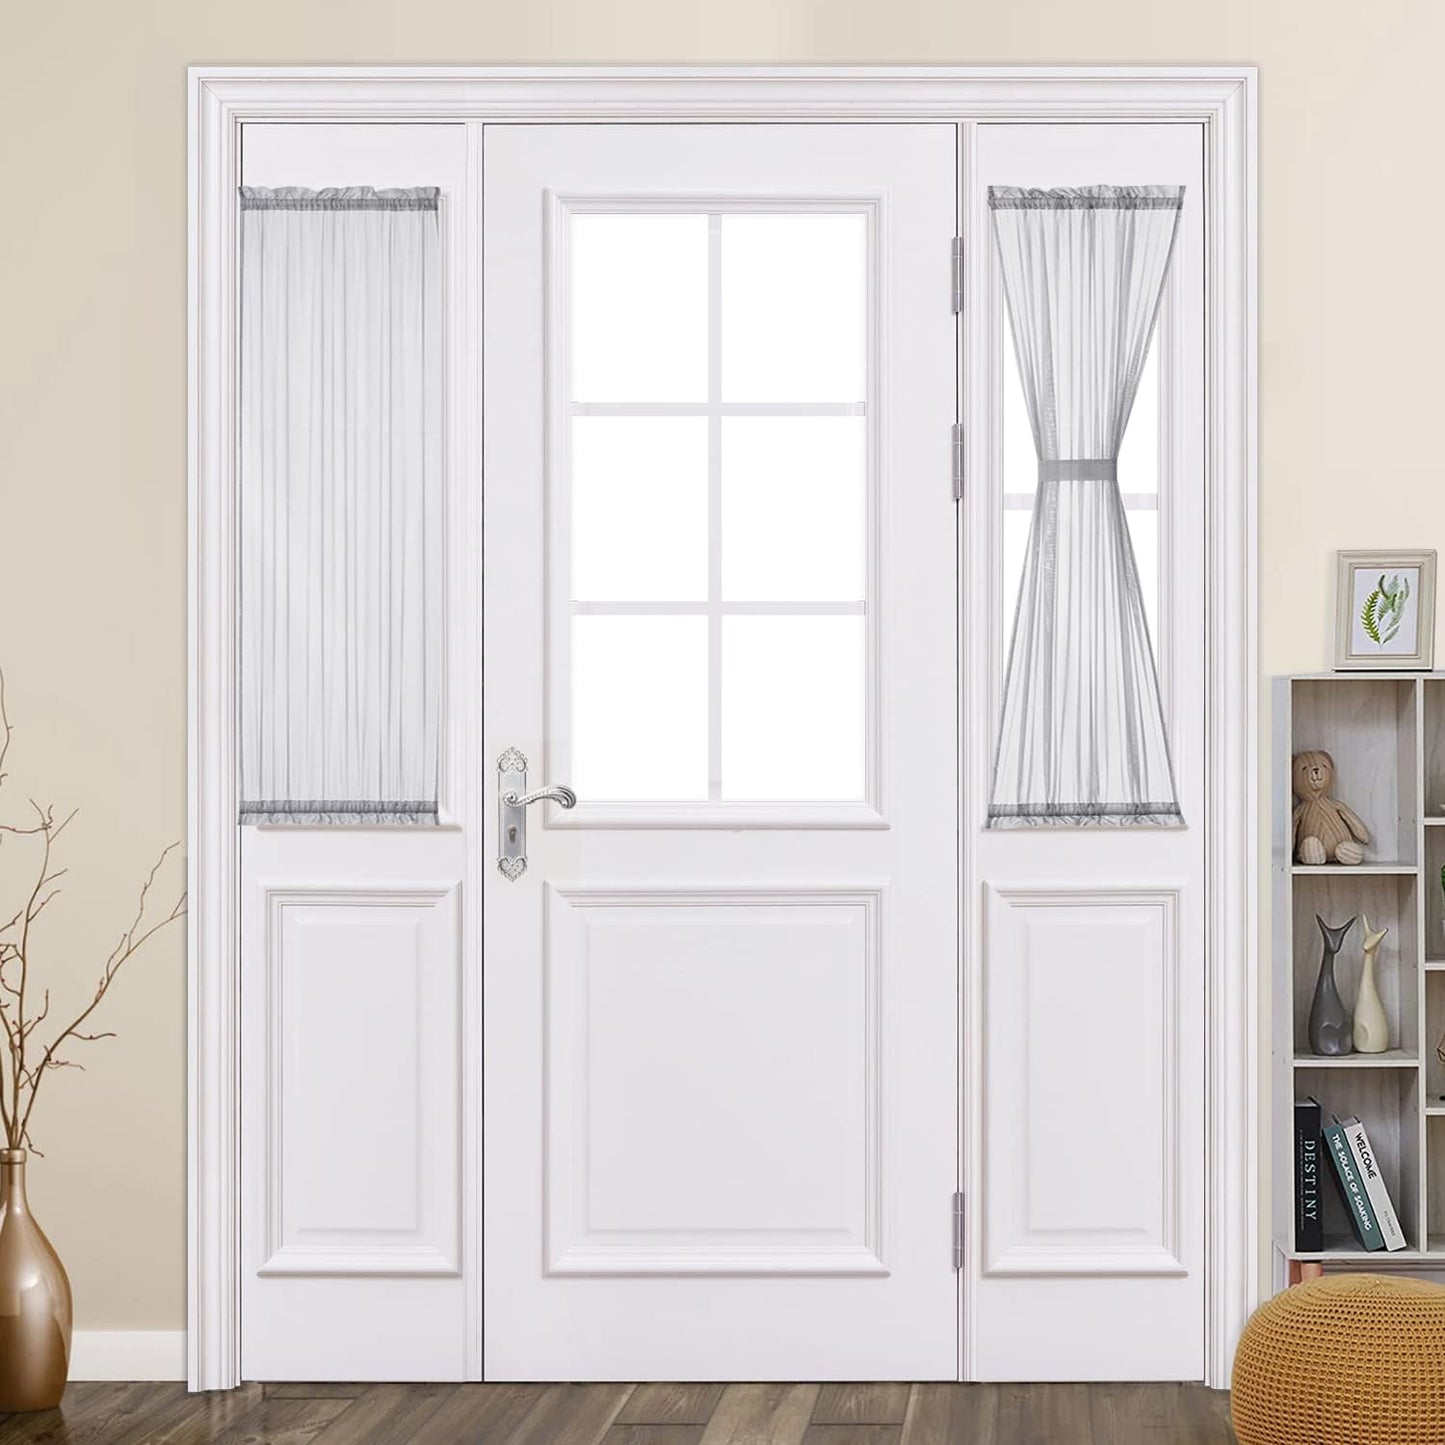 MIULEE French Door Sheer Curtains for Front Back Patio Glass Door Light Filtering Window Treatment with 2 Tiebacks 54 Wide and 72 Inches Length, White, Set of 2  MIULEE Light Grey 25"W X 40"L 